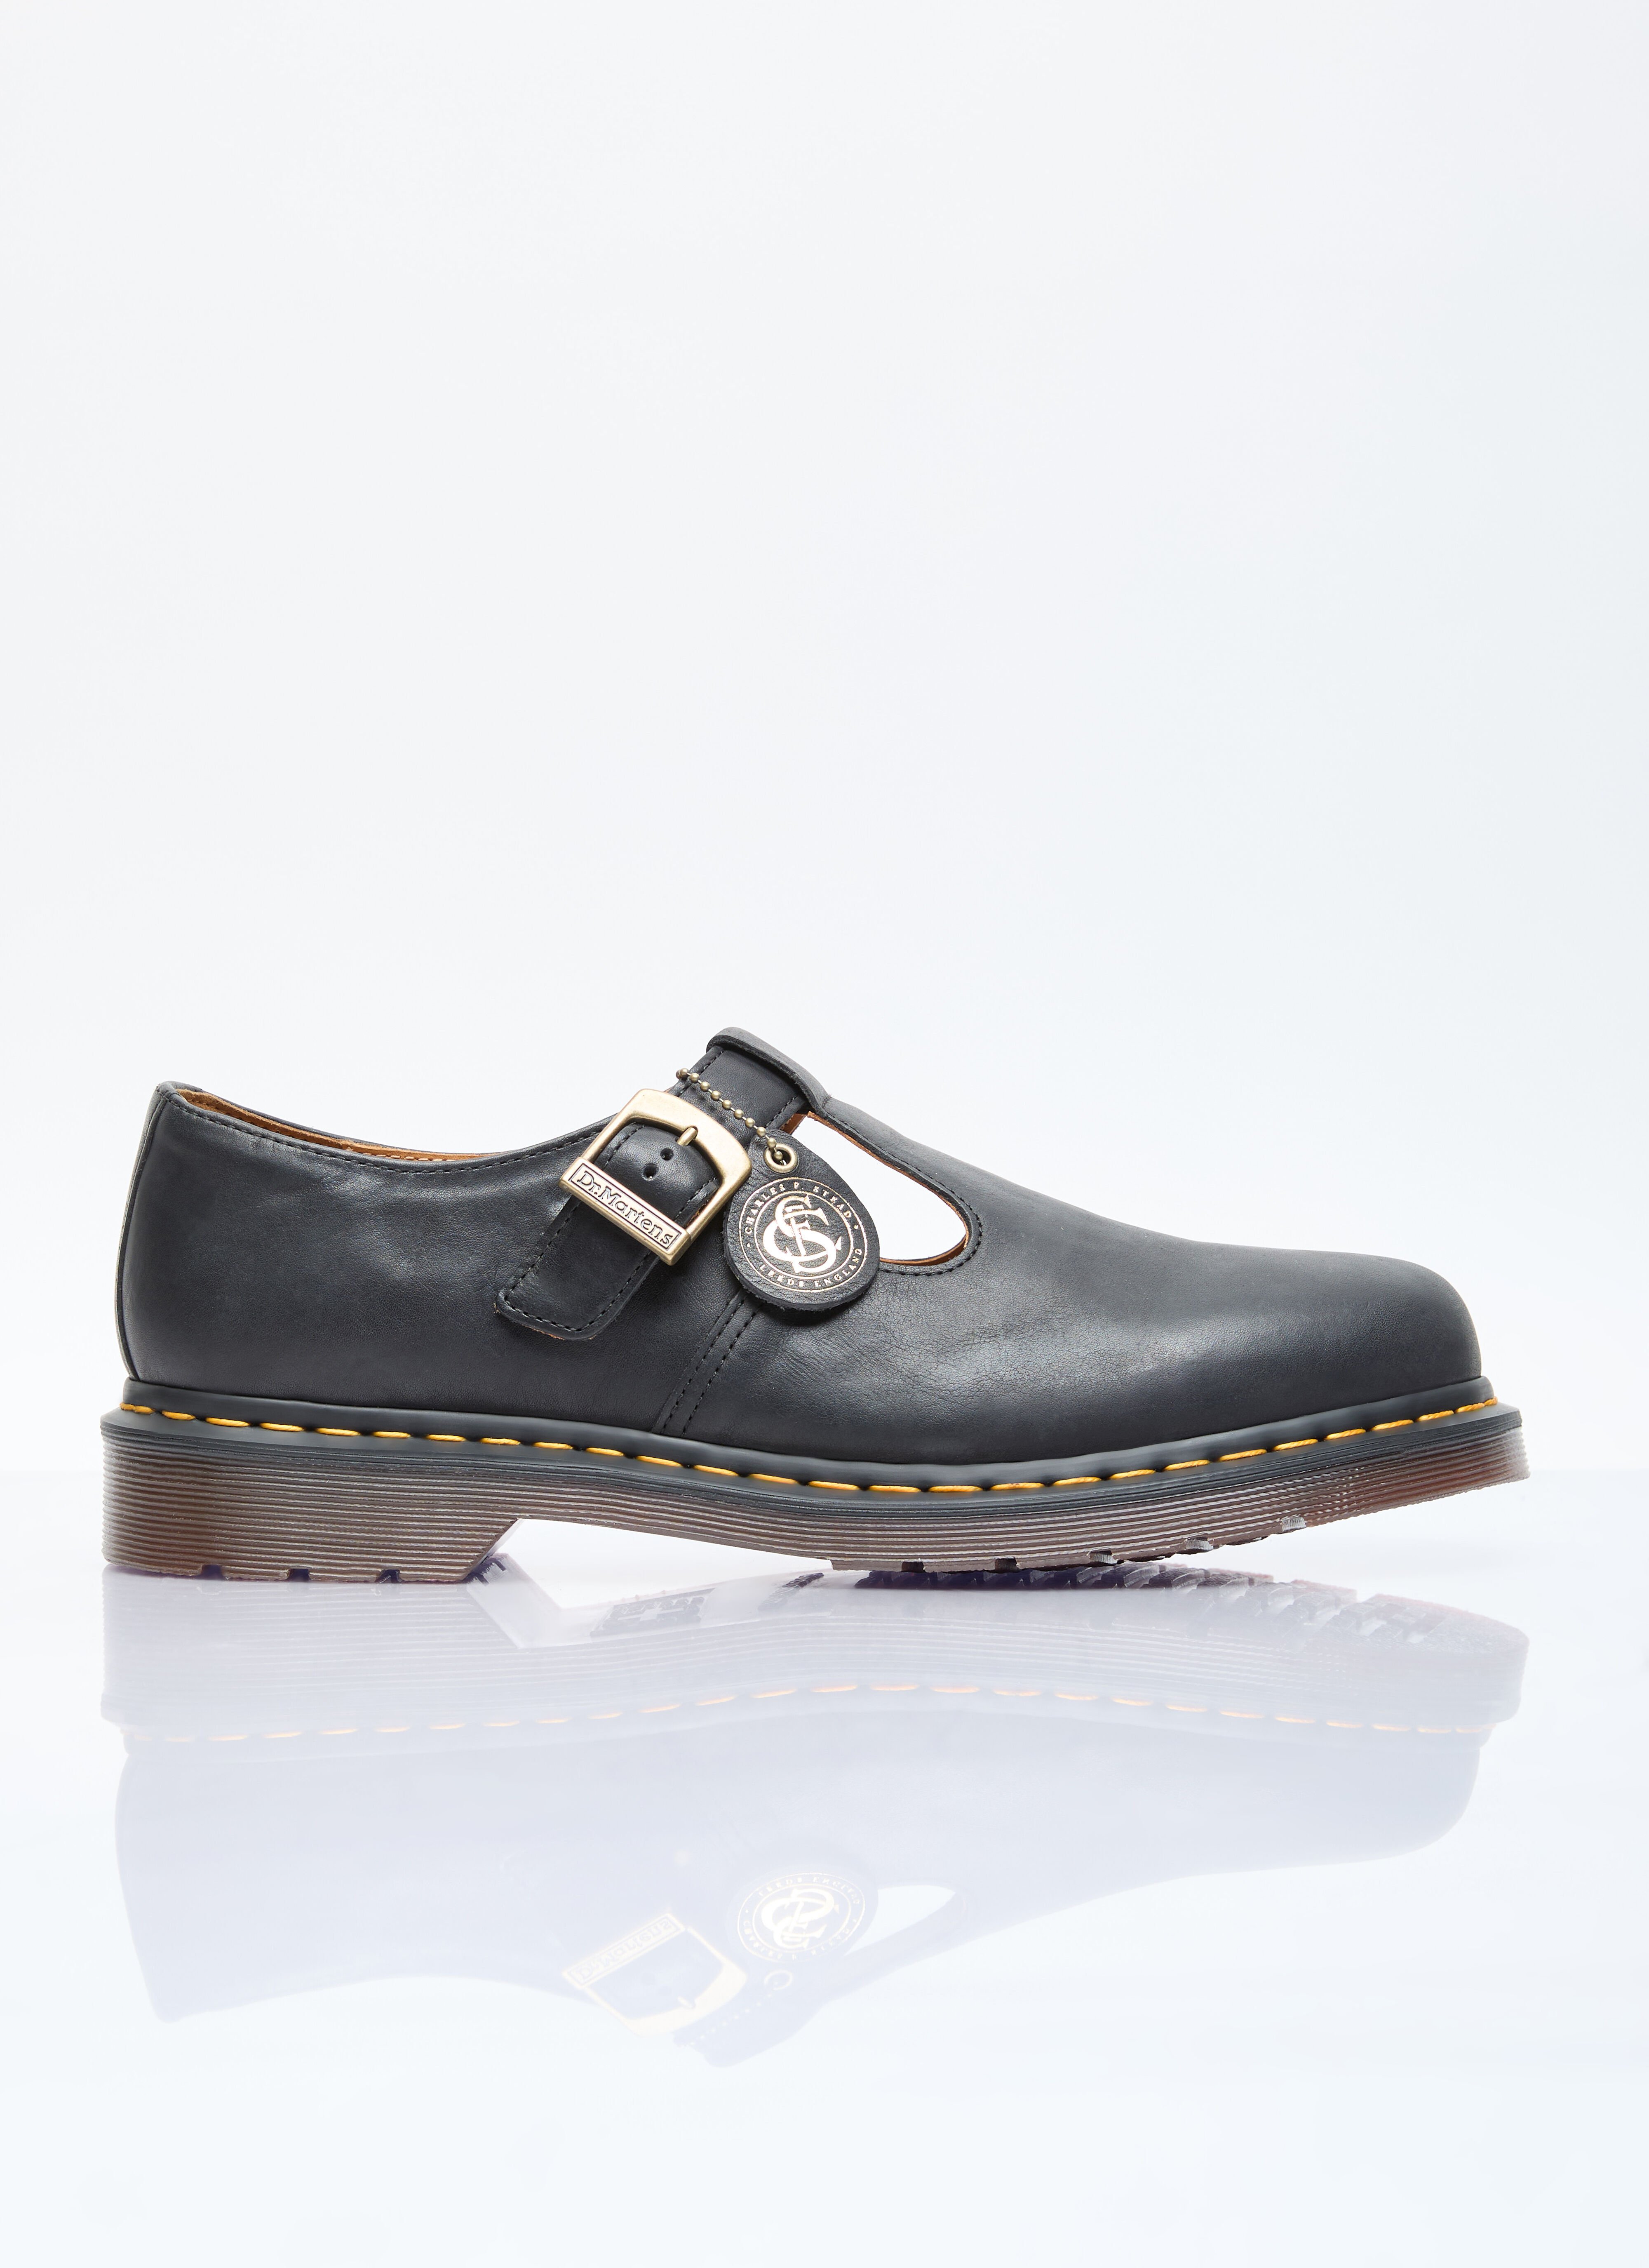 Dr. Martens T-Bar Leather Shoes Green drm0156002